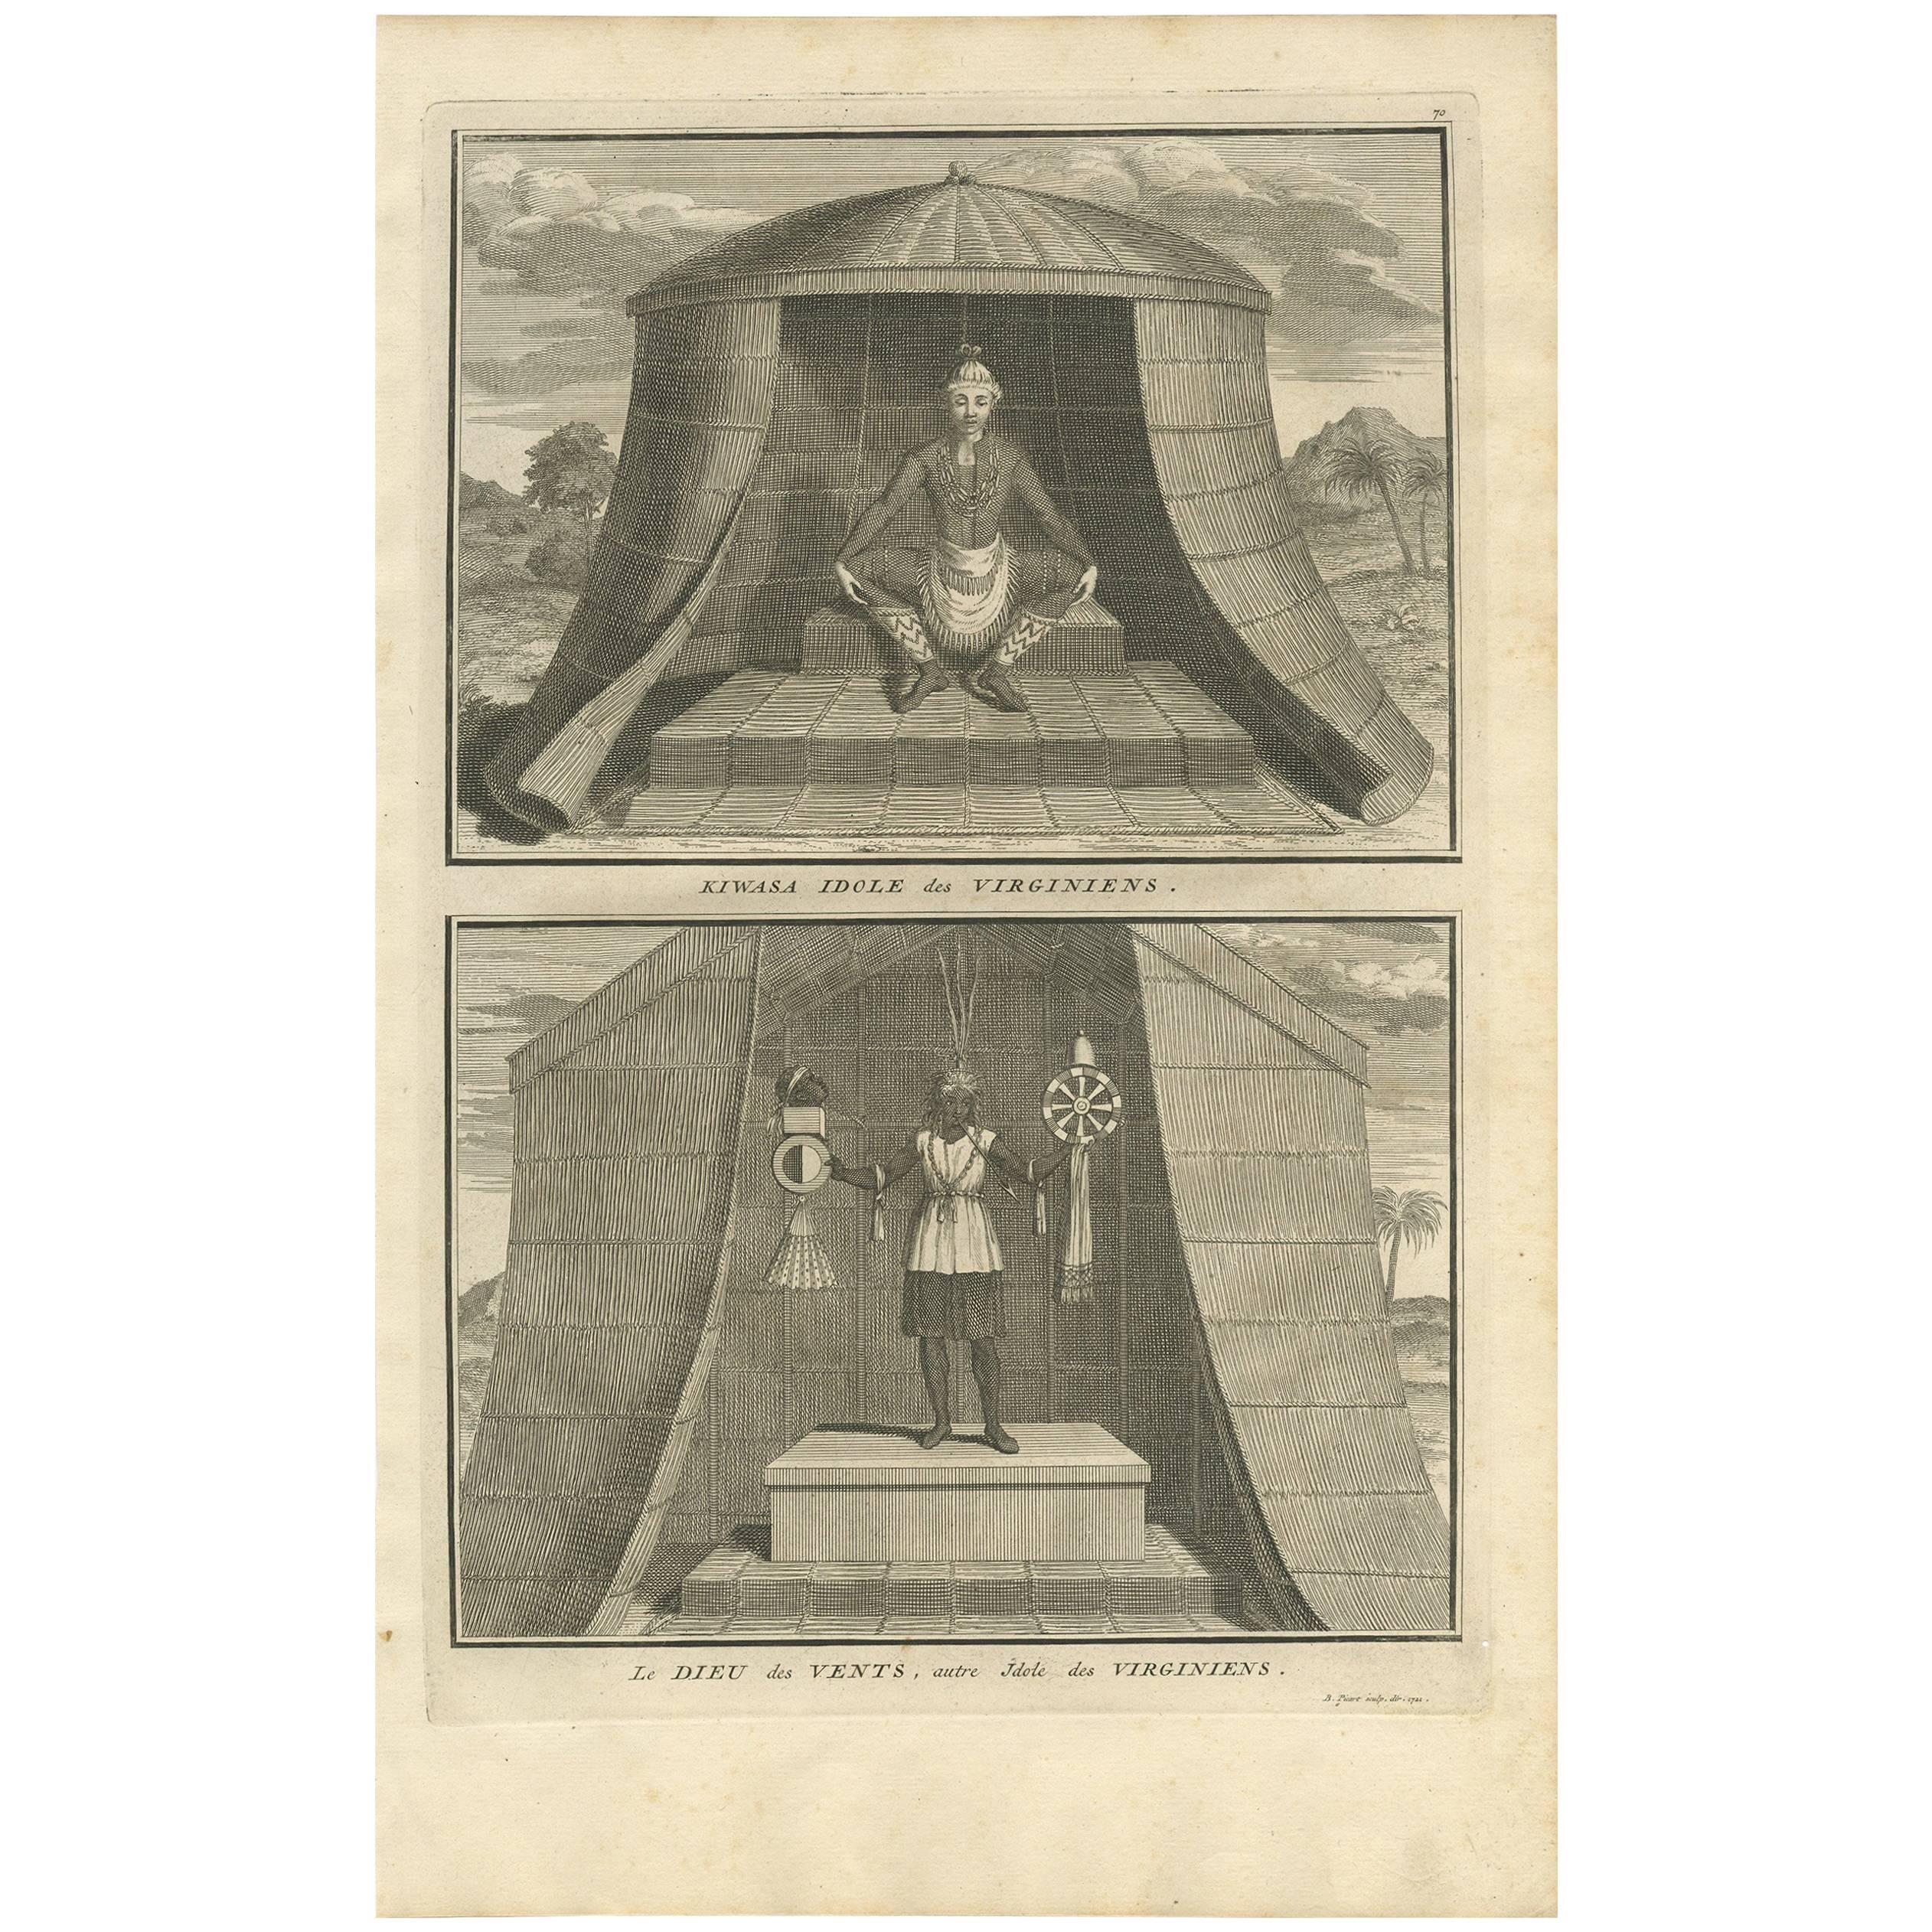 Antique Print of Two Idols of the Virginian Culture by B. Picart, 1721